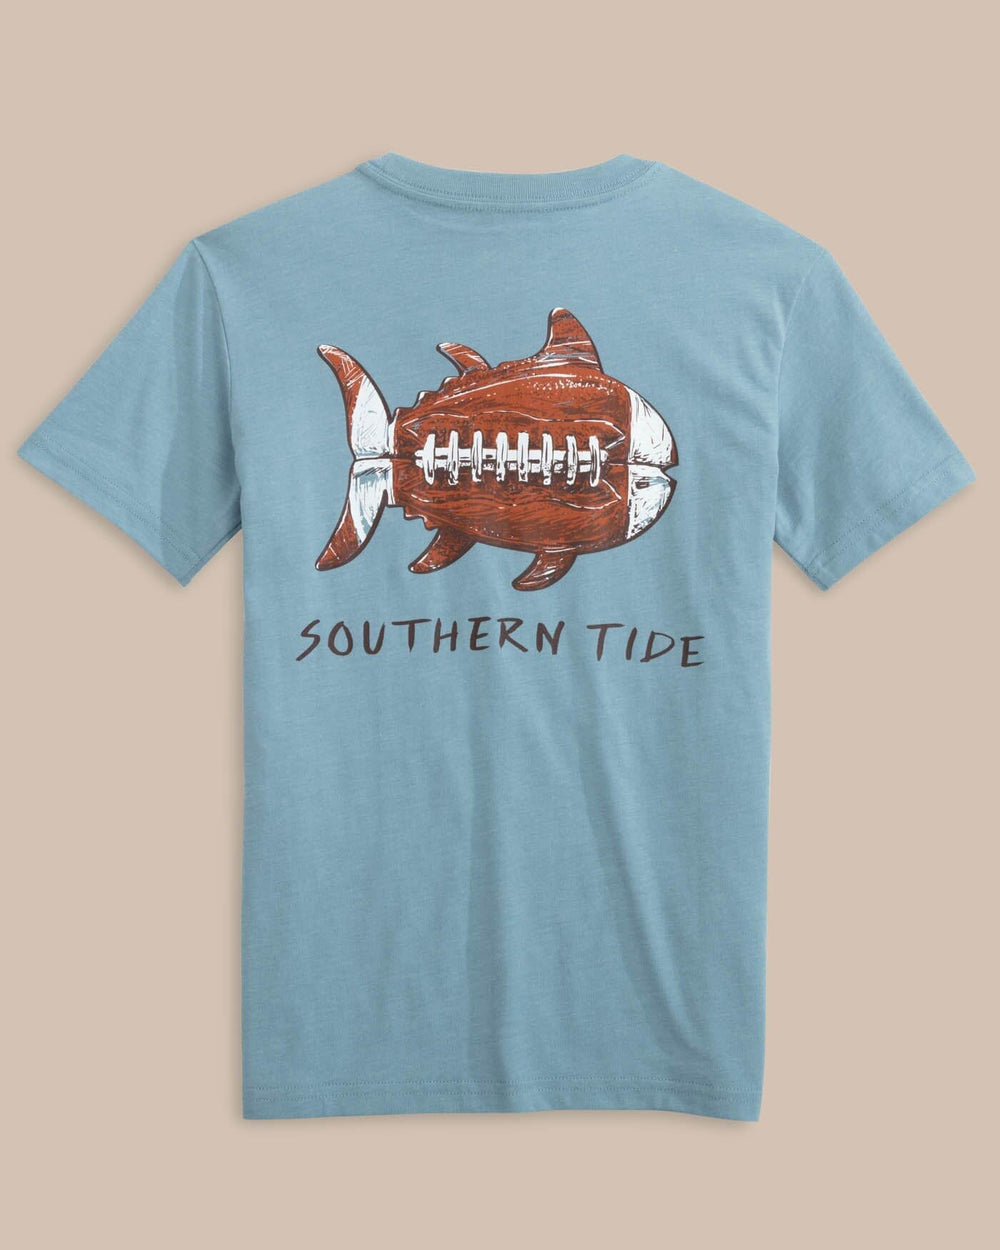 The back view of the Southern Tide Kids Sketched Football Heather T-Shirt by Southern Tide - Heather Blue Shadow